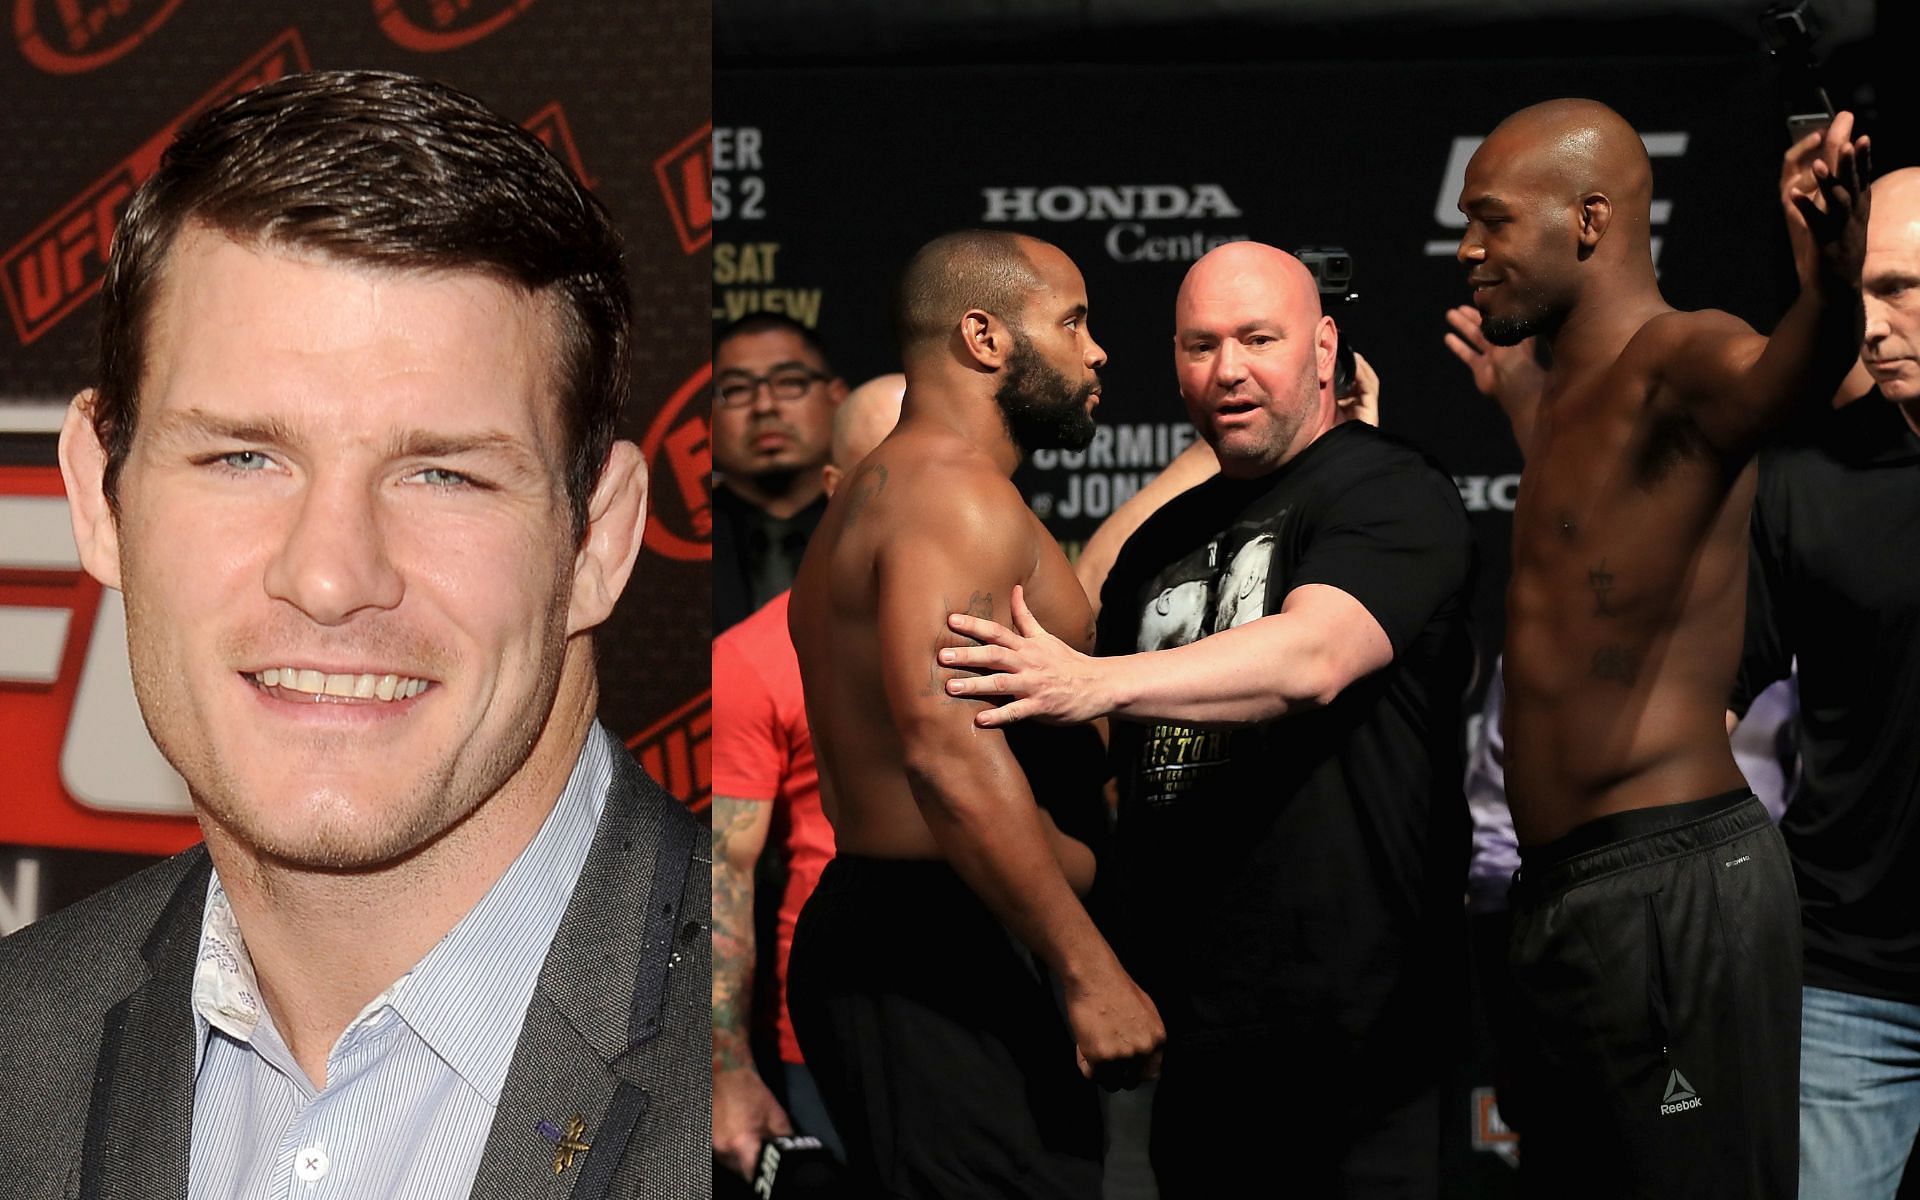 Michael Bisping (left) and Daniel Cormier posing with Jon Jones during the UFC 214 weigh-in ceremony in July 2017 (right)